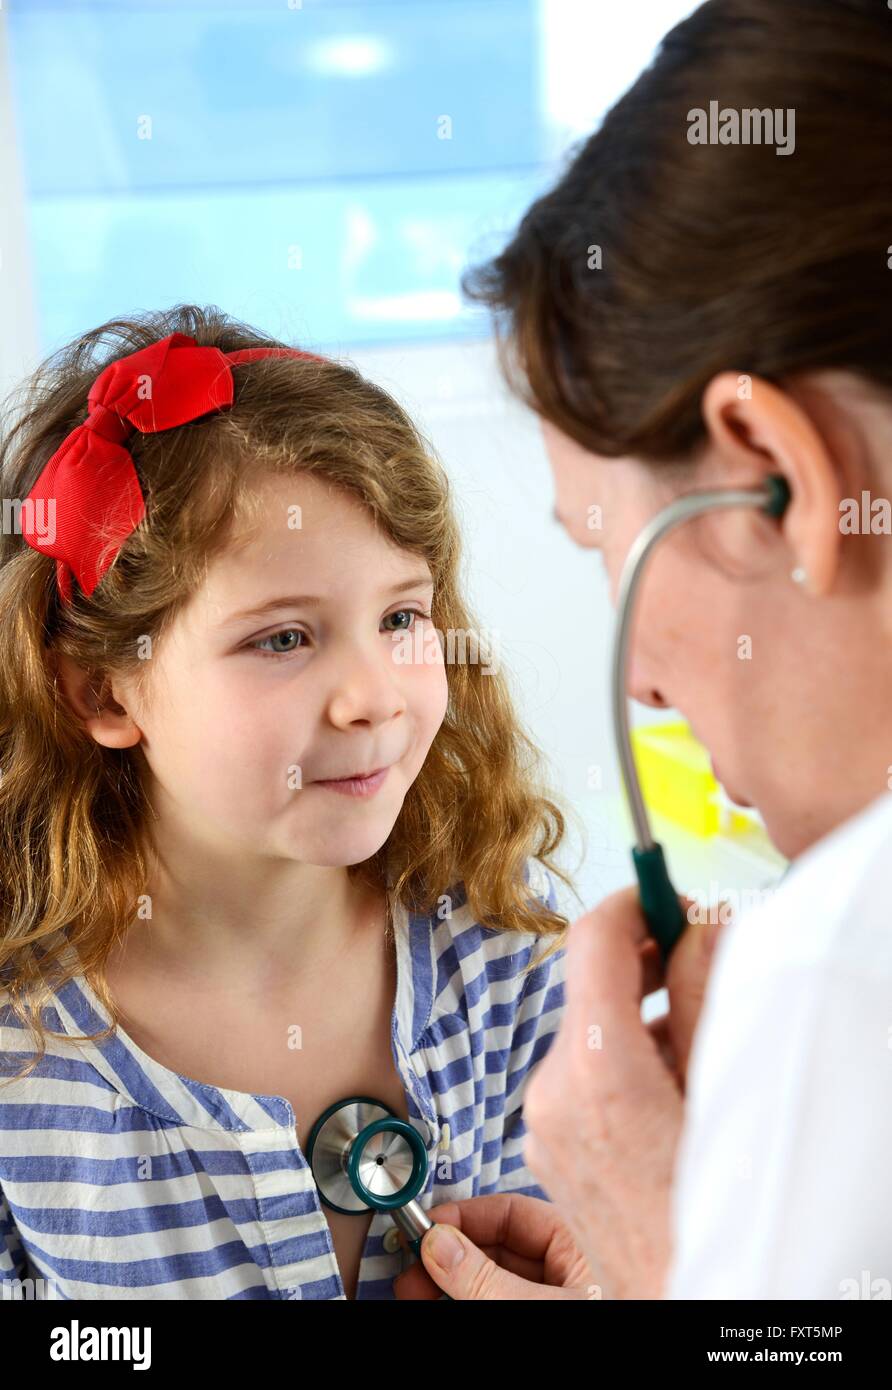 Hospital doctor examining a girl's chest with a stethoscope Stock Photo